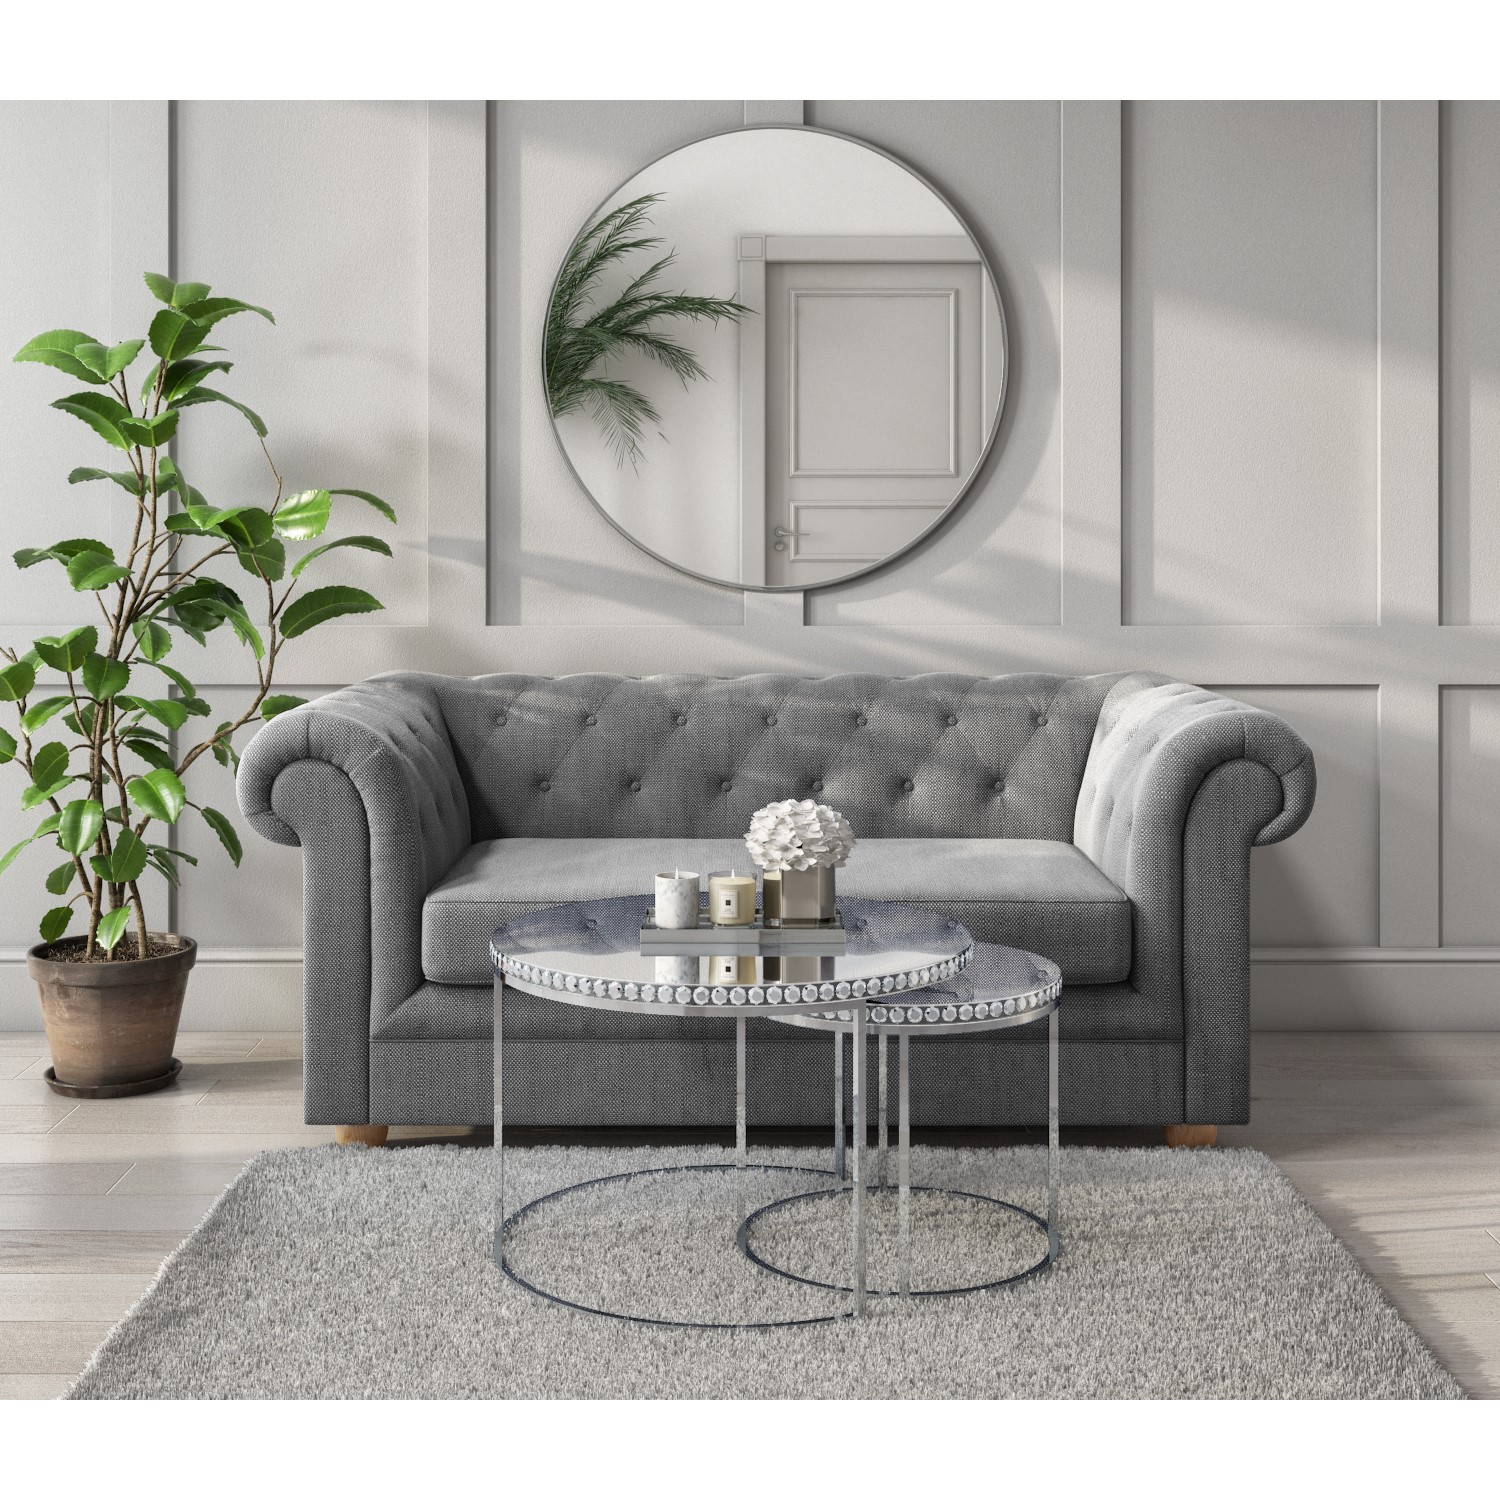 Round Mirrored Coffee Tables With, Mirrored Furniture Coffee Table